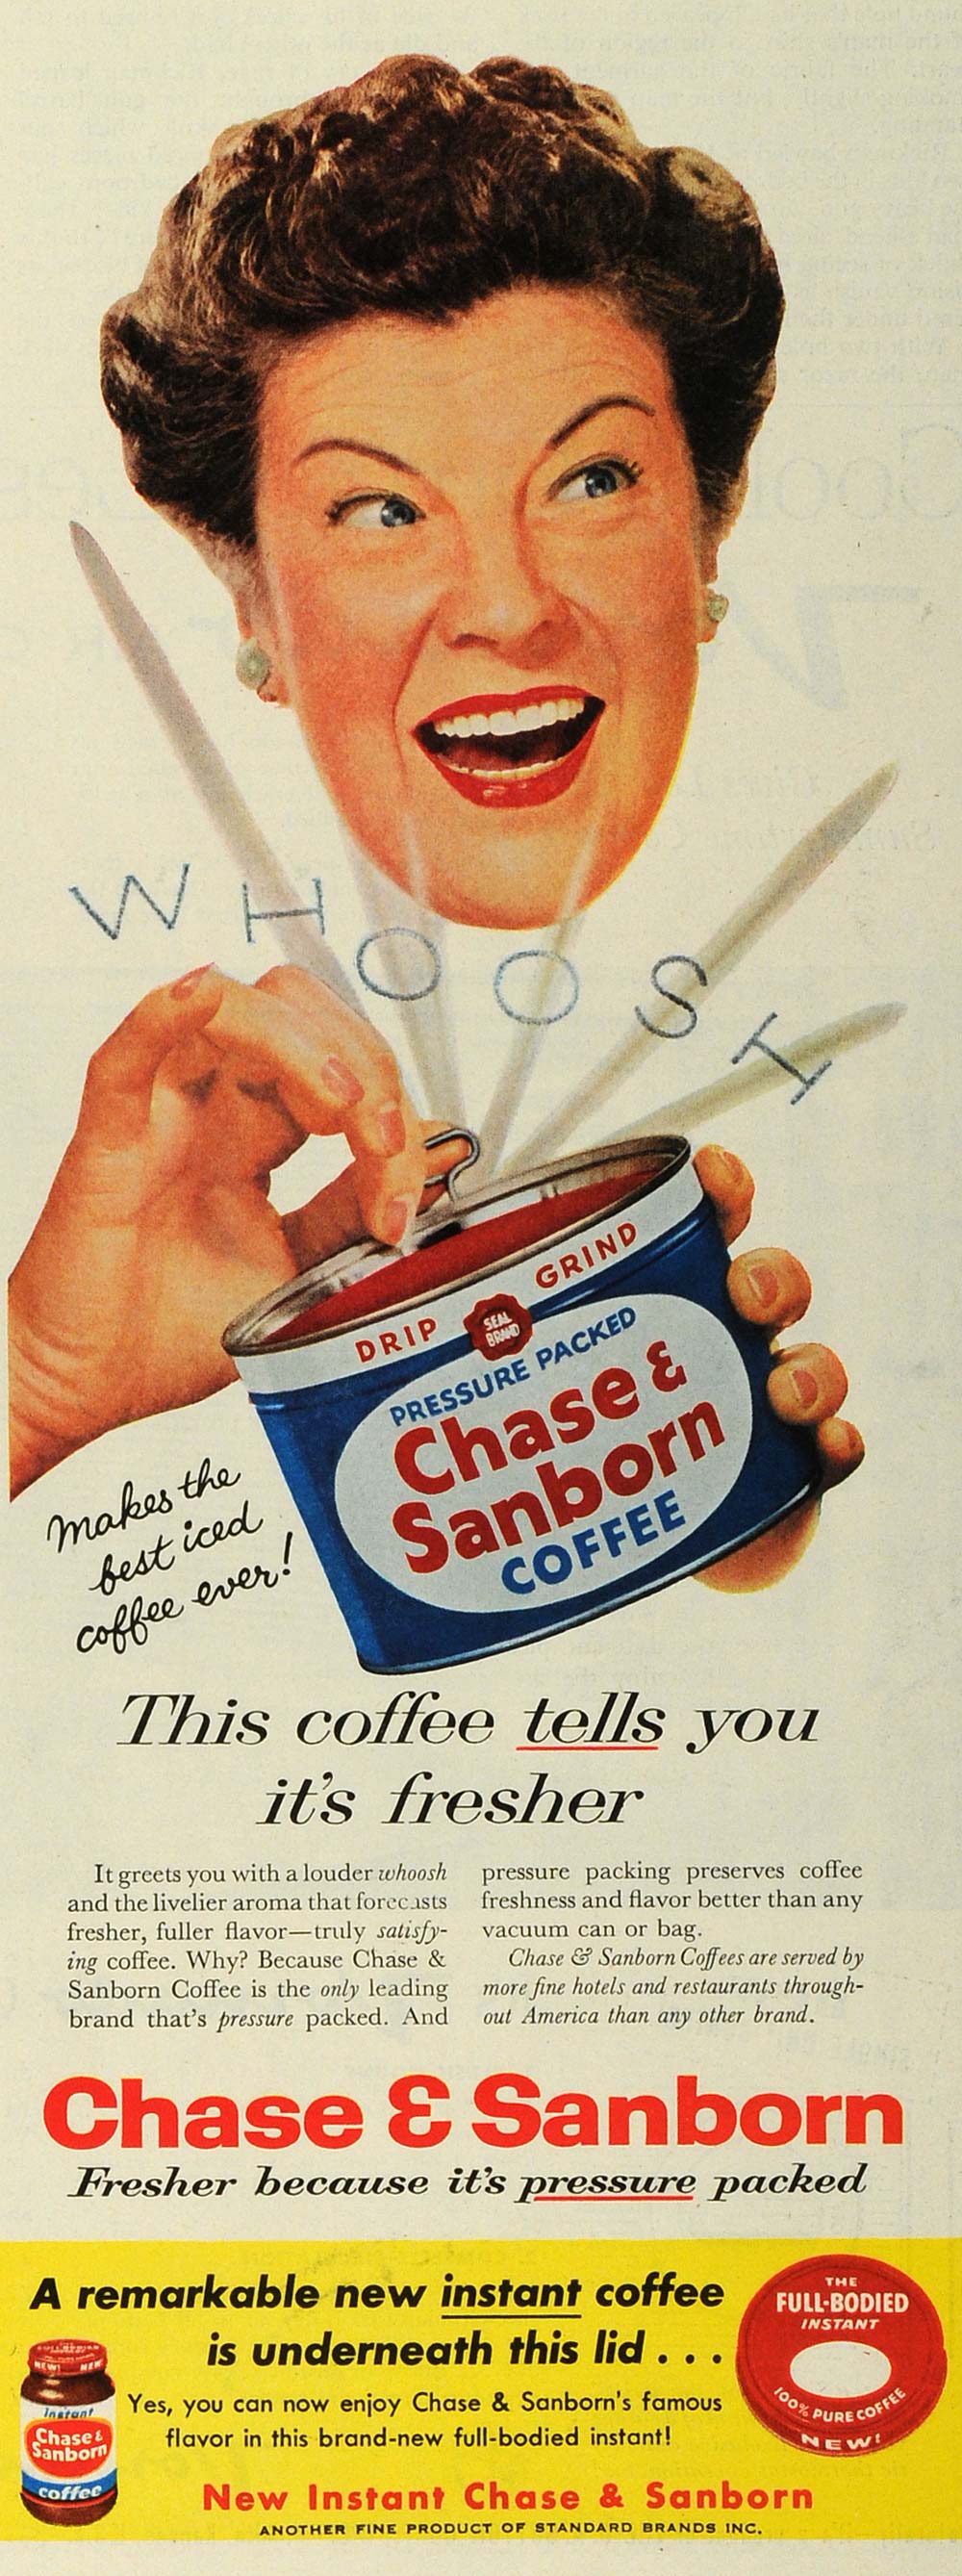 1956 Ad Standard Brands Inc Chase Sanborn Coffee Can Beverage Drink SEP5